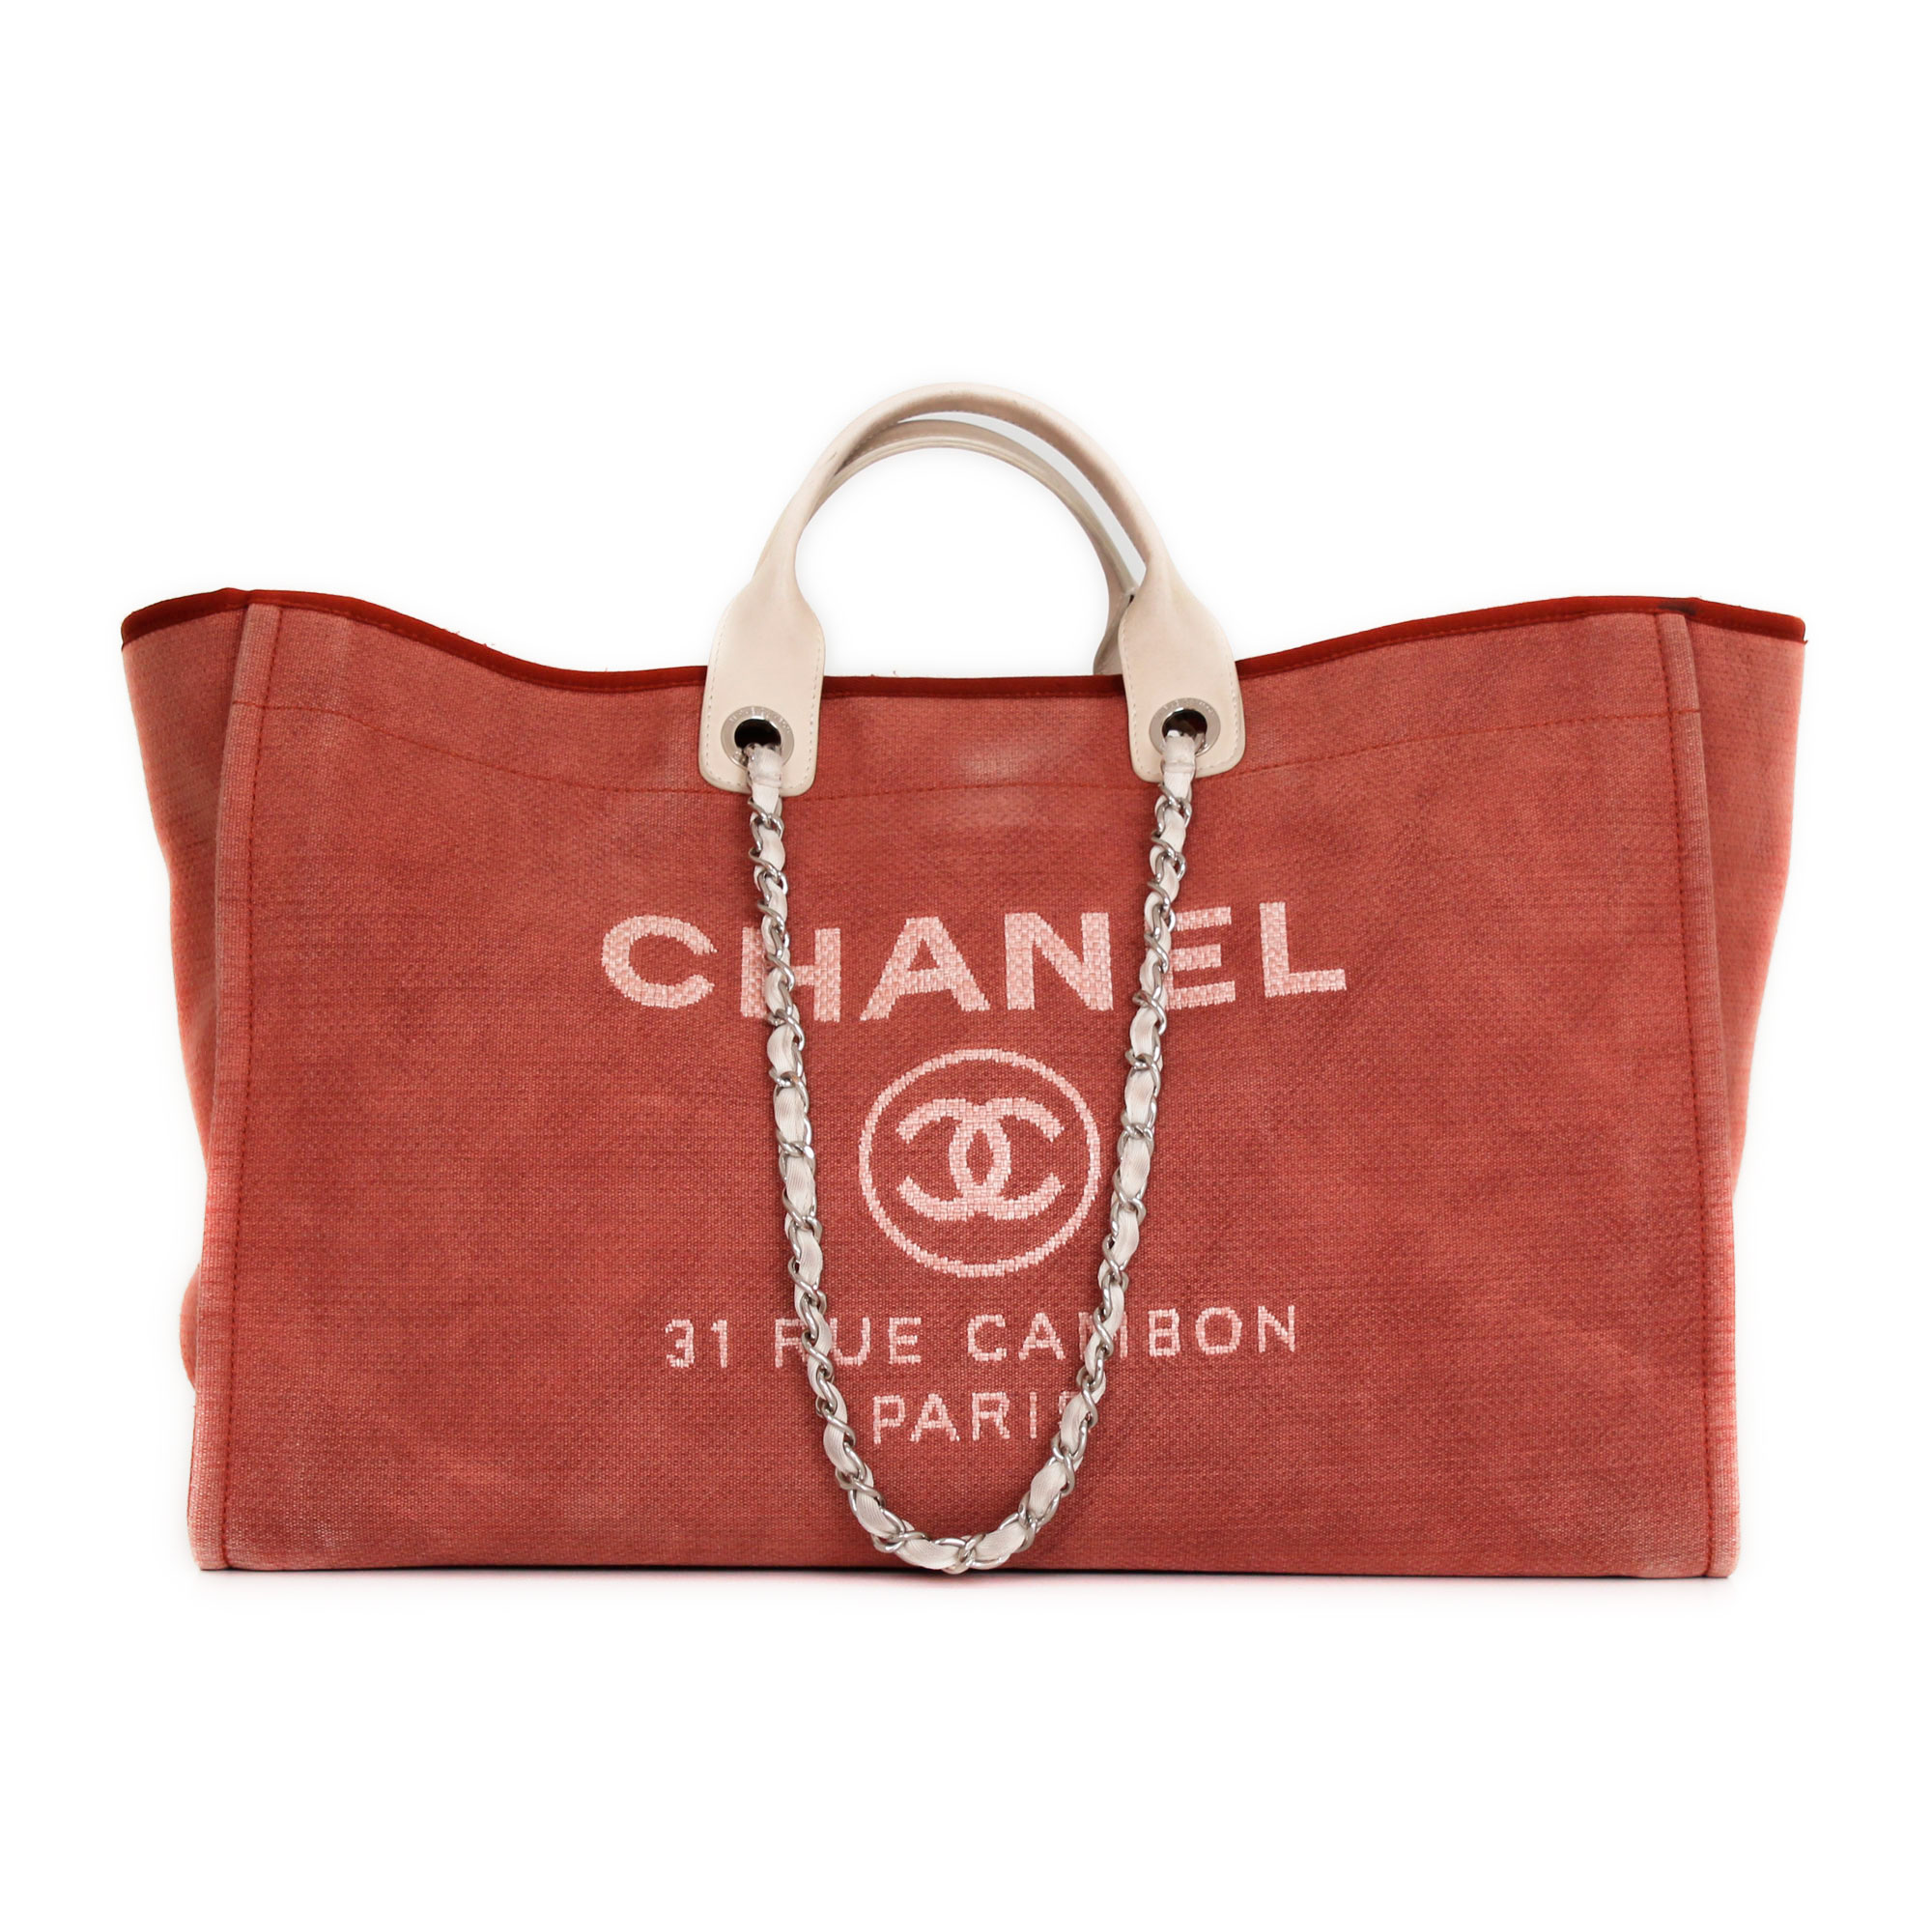 Chanel Deauville Tote - Janet Mandell